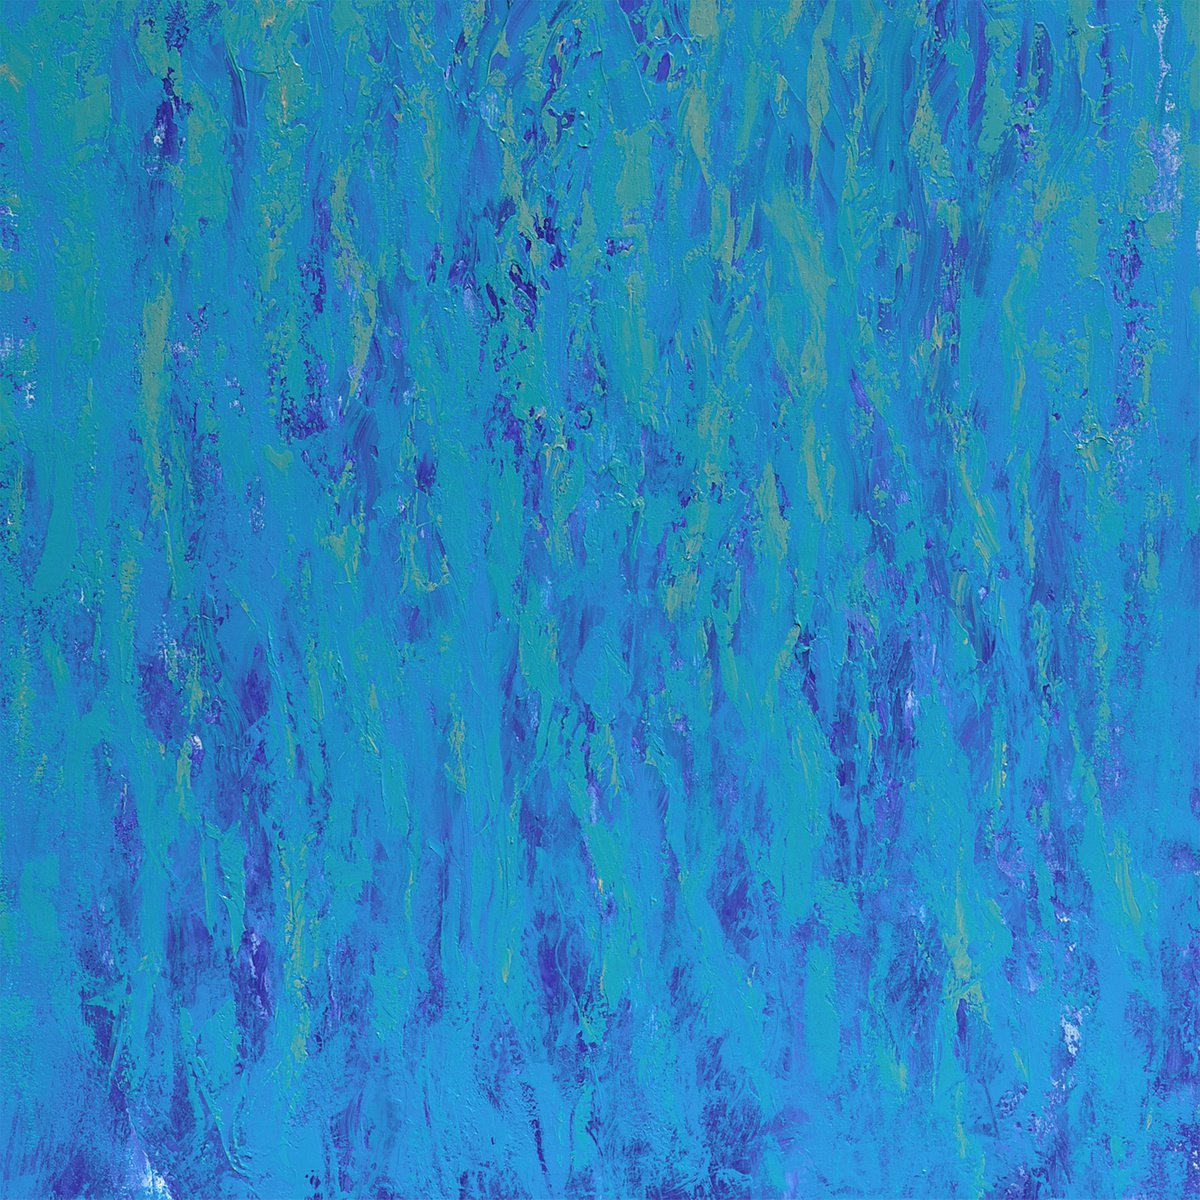 Vibrant Blues - Modern Abstract Expressionist Seascape by Suzanne Vaughan